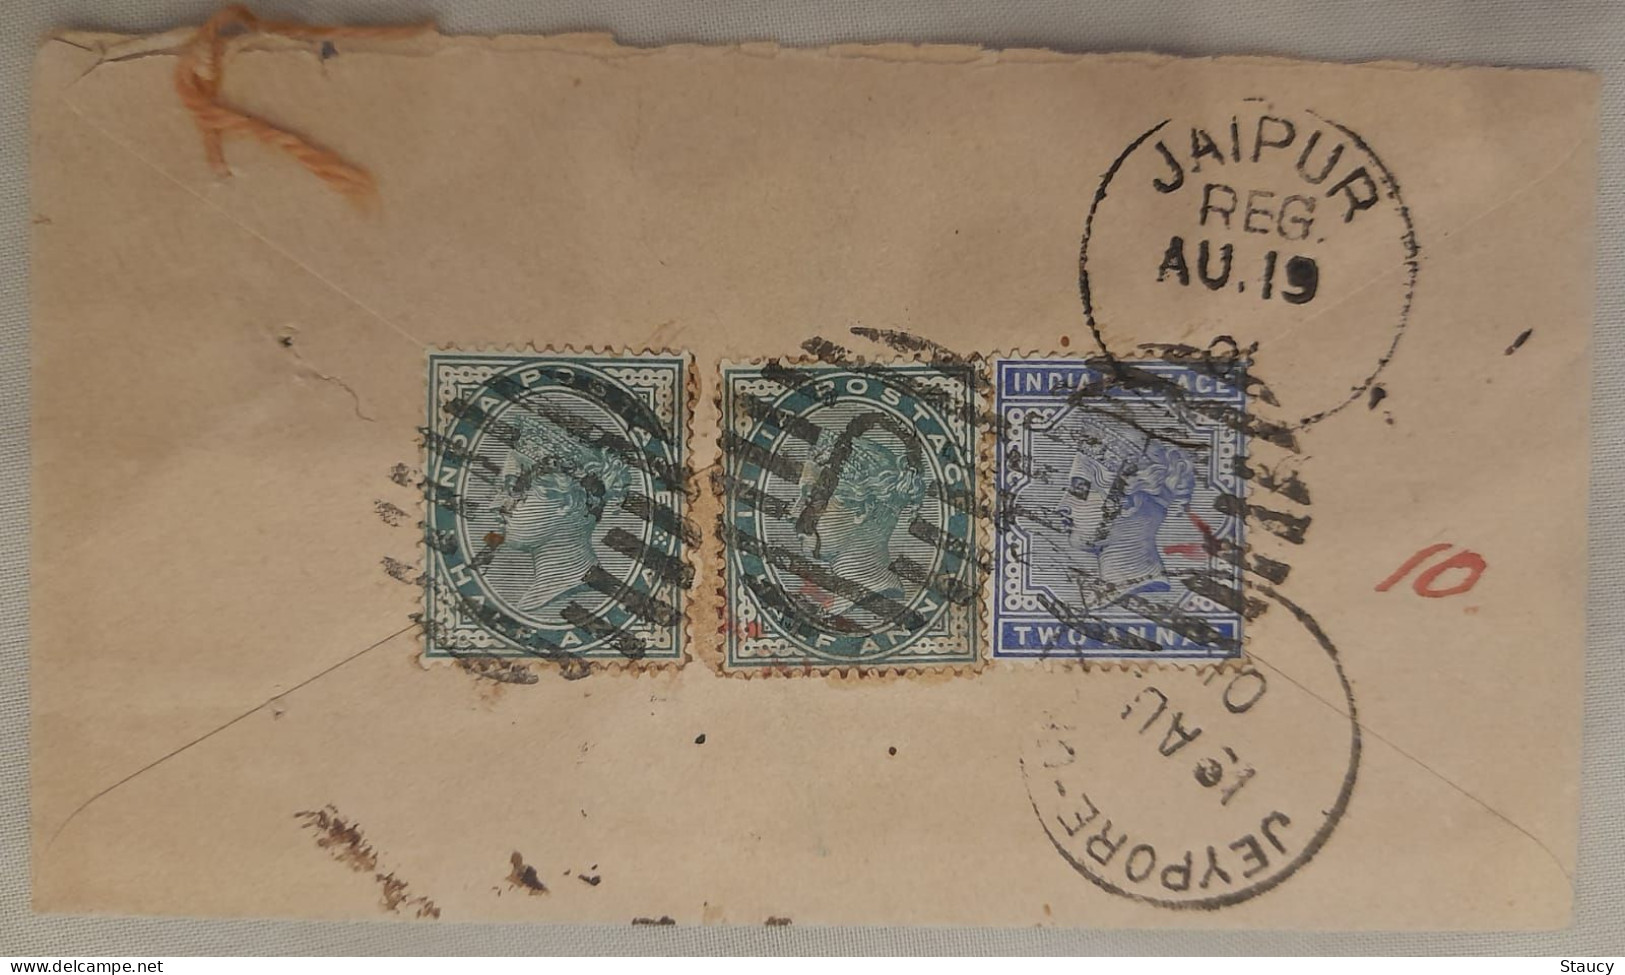 BRITISH INDIA QV 2a + 2 X 1/2a Anna STAMPS MIAX FRANKING "JAIPUR STATE" COVER, NICE CANCEL ON FRONT & BACK As Per Scan - Jaipur